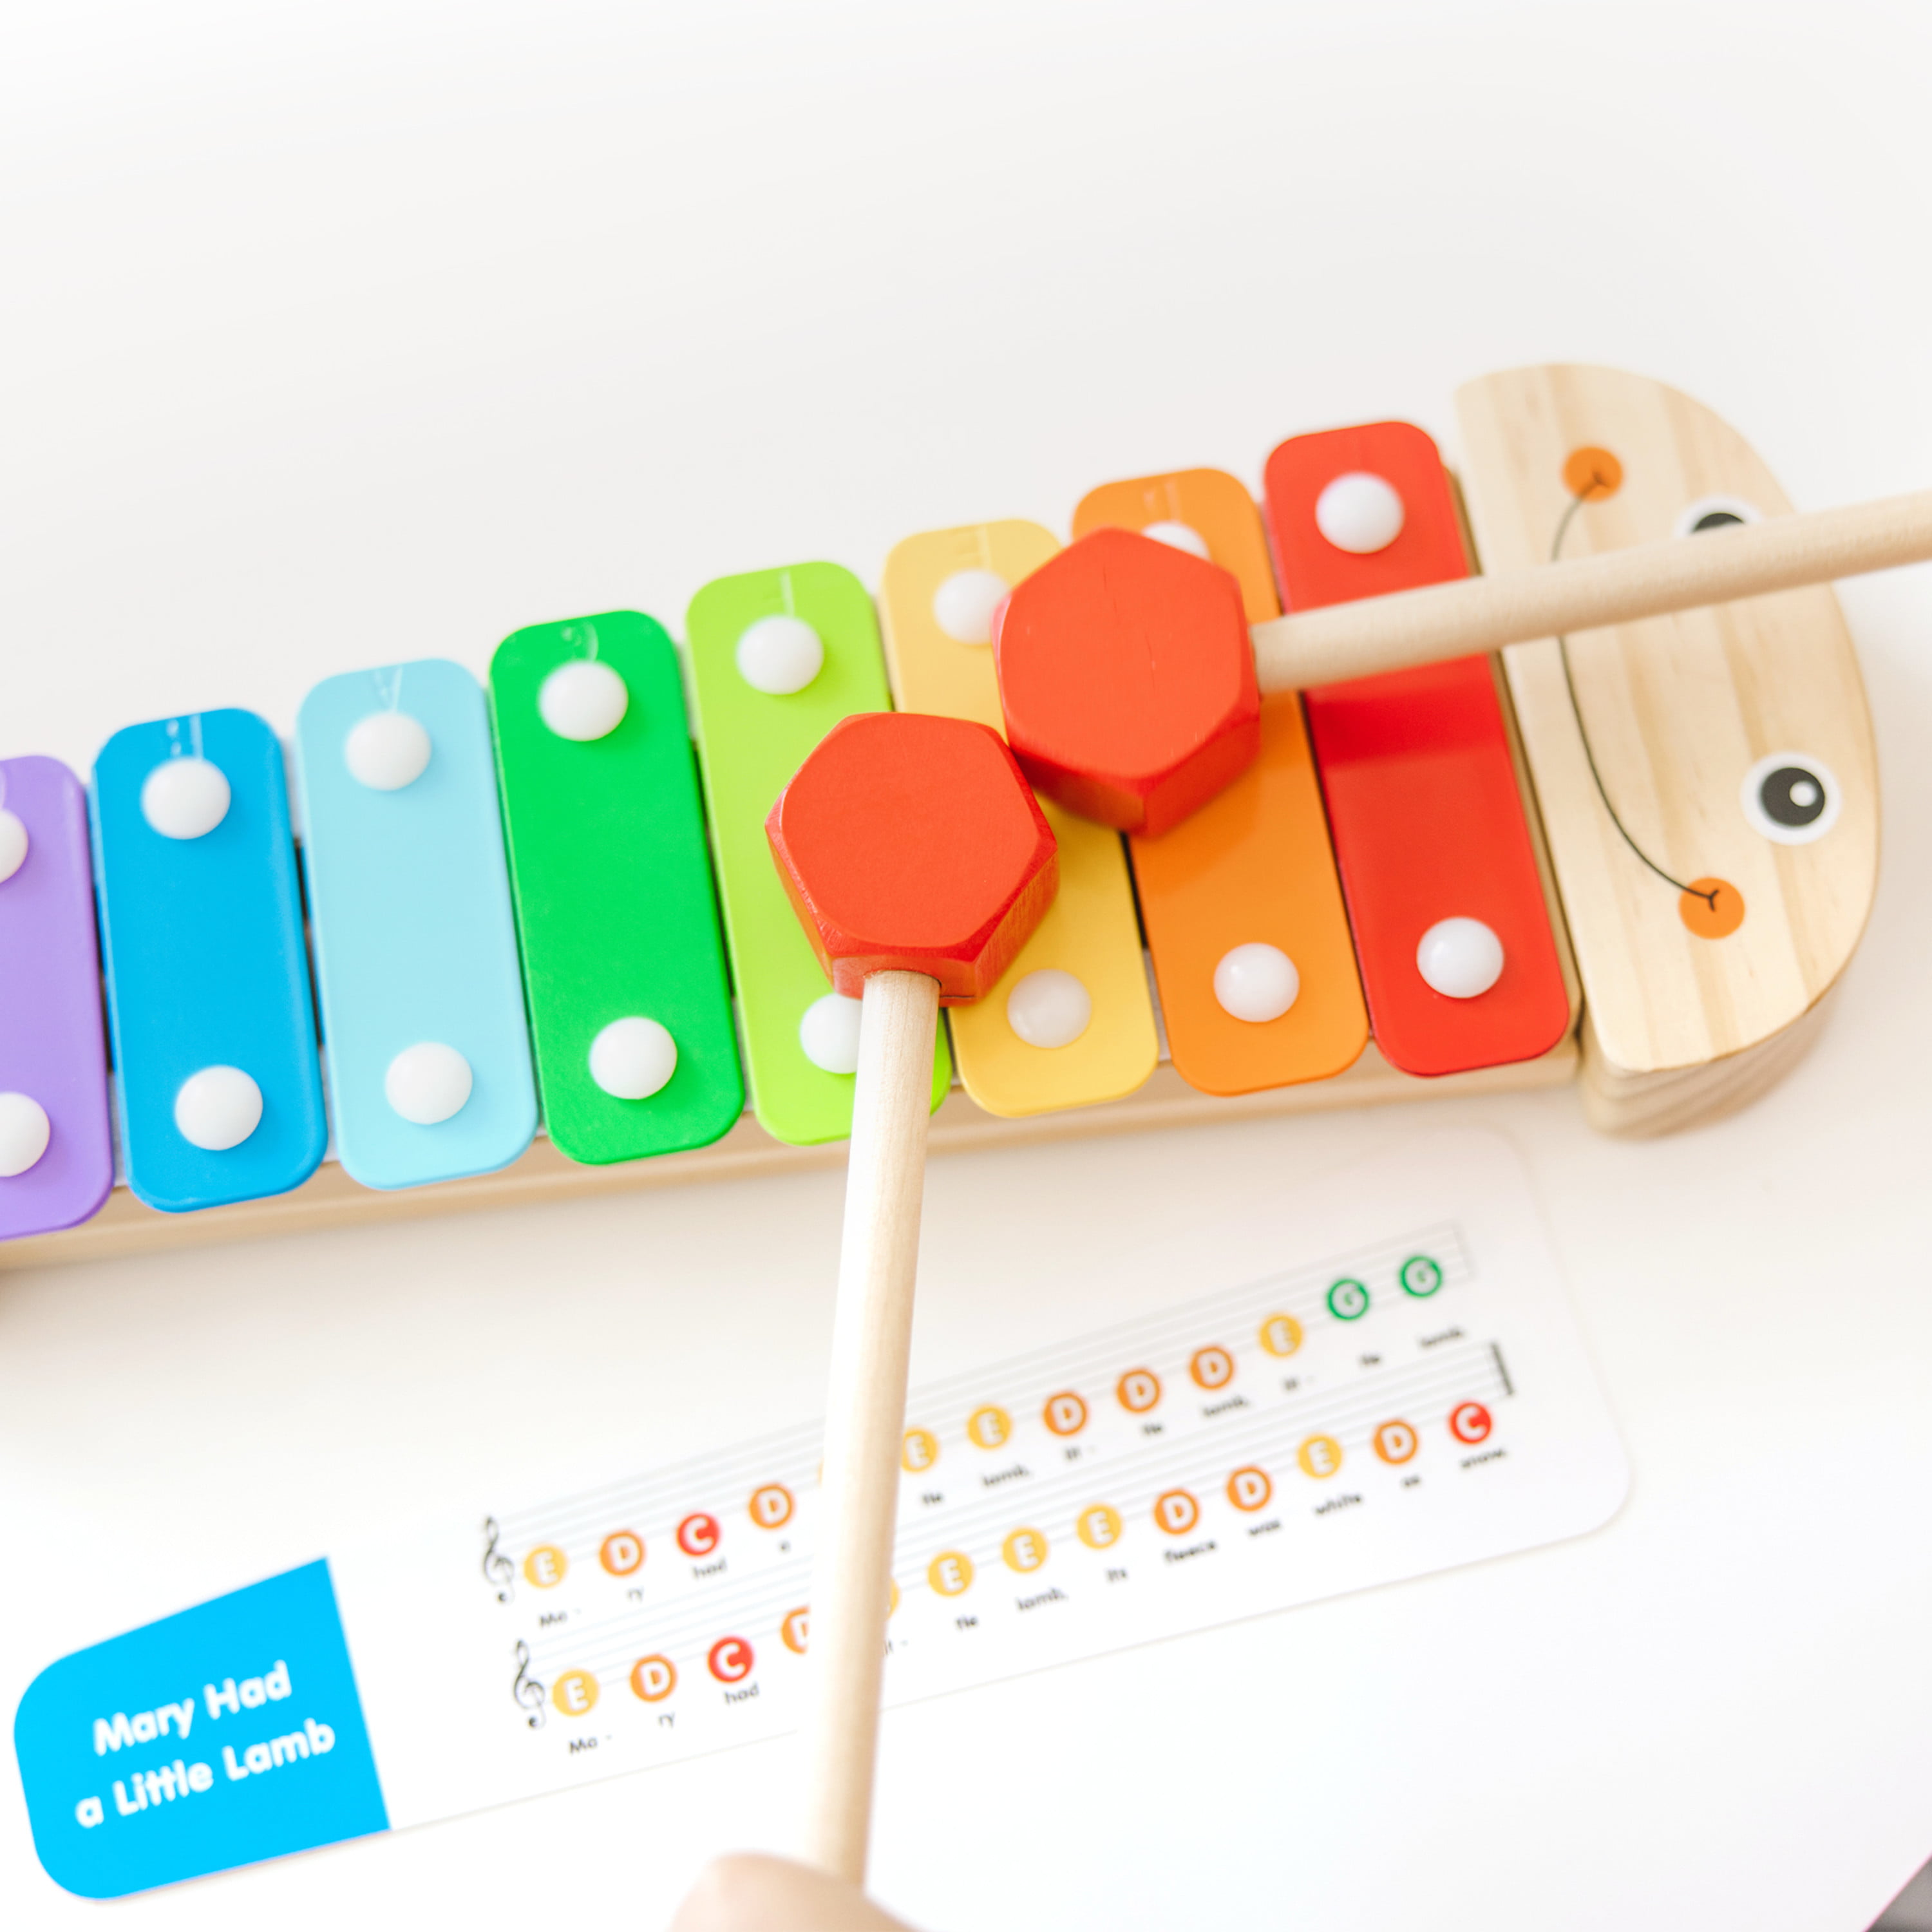 Musical Instruments Rainbow-Colored One Octave of Notes Melissa & Doug Caterpillar Xylophone 18 H x 6.2 W x 2 L Self-Storing Wooden Mallets 